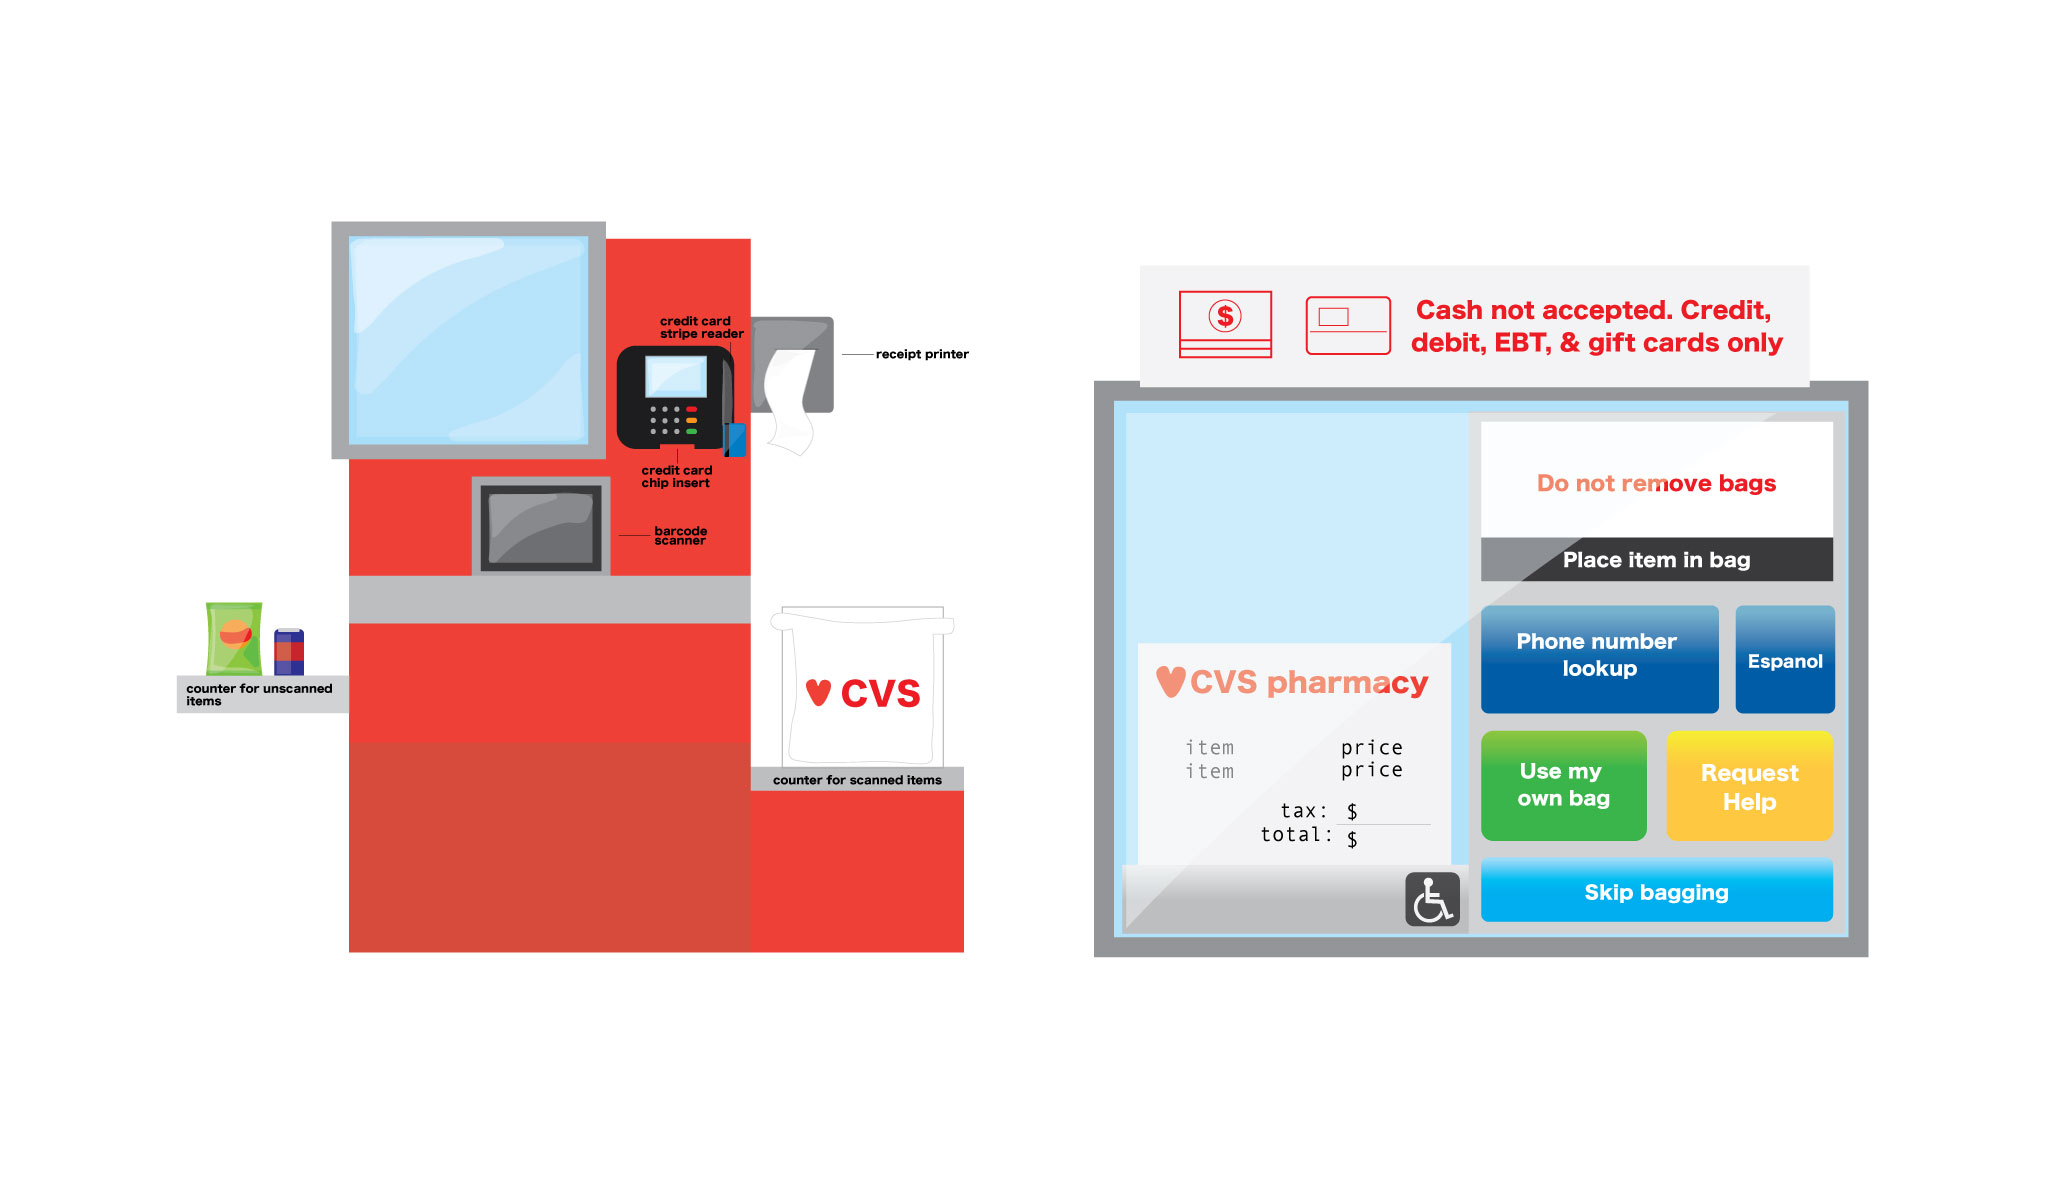 vector image of checkout machine